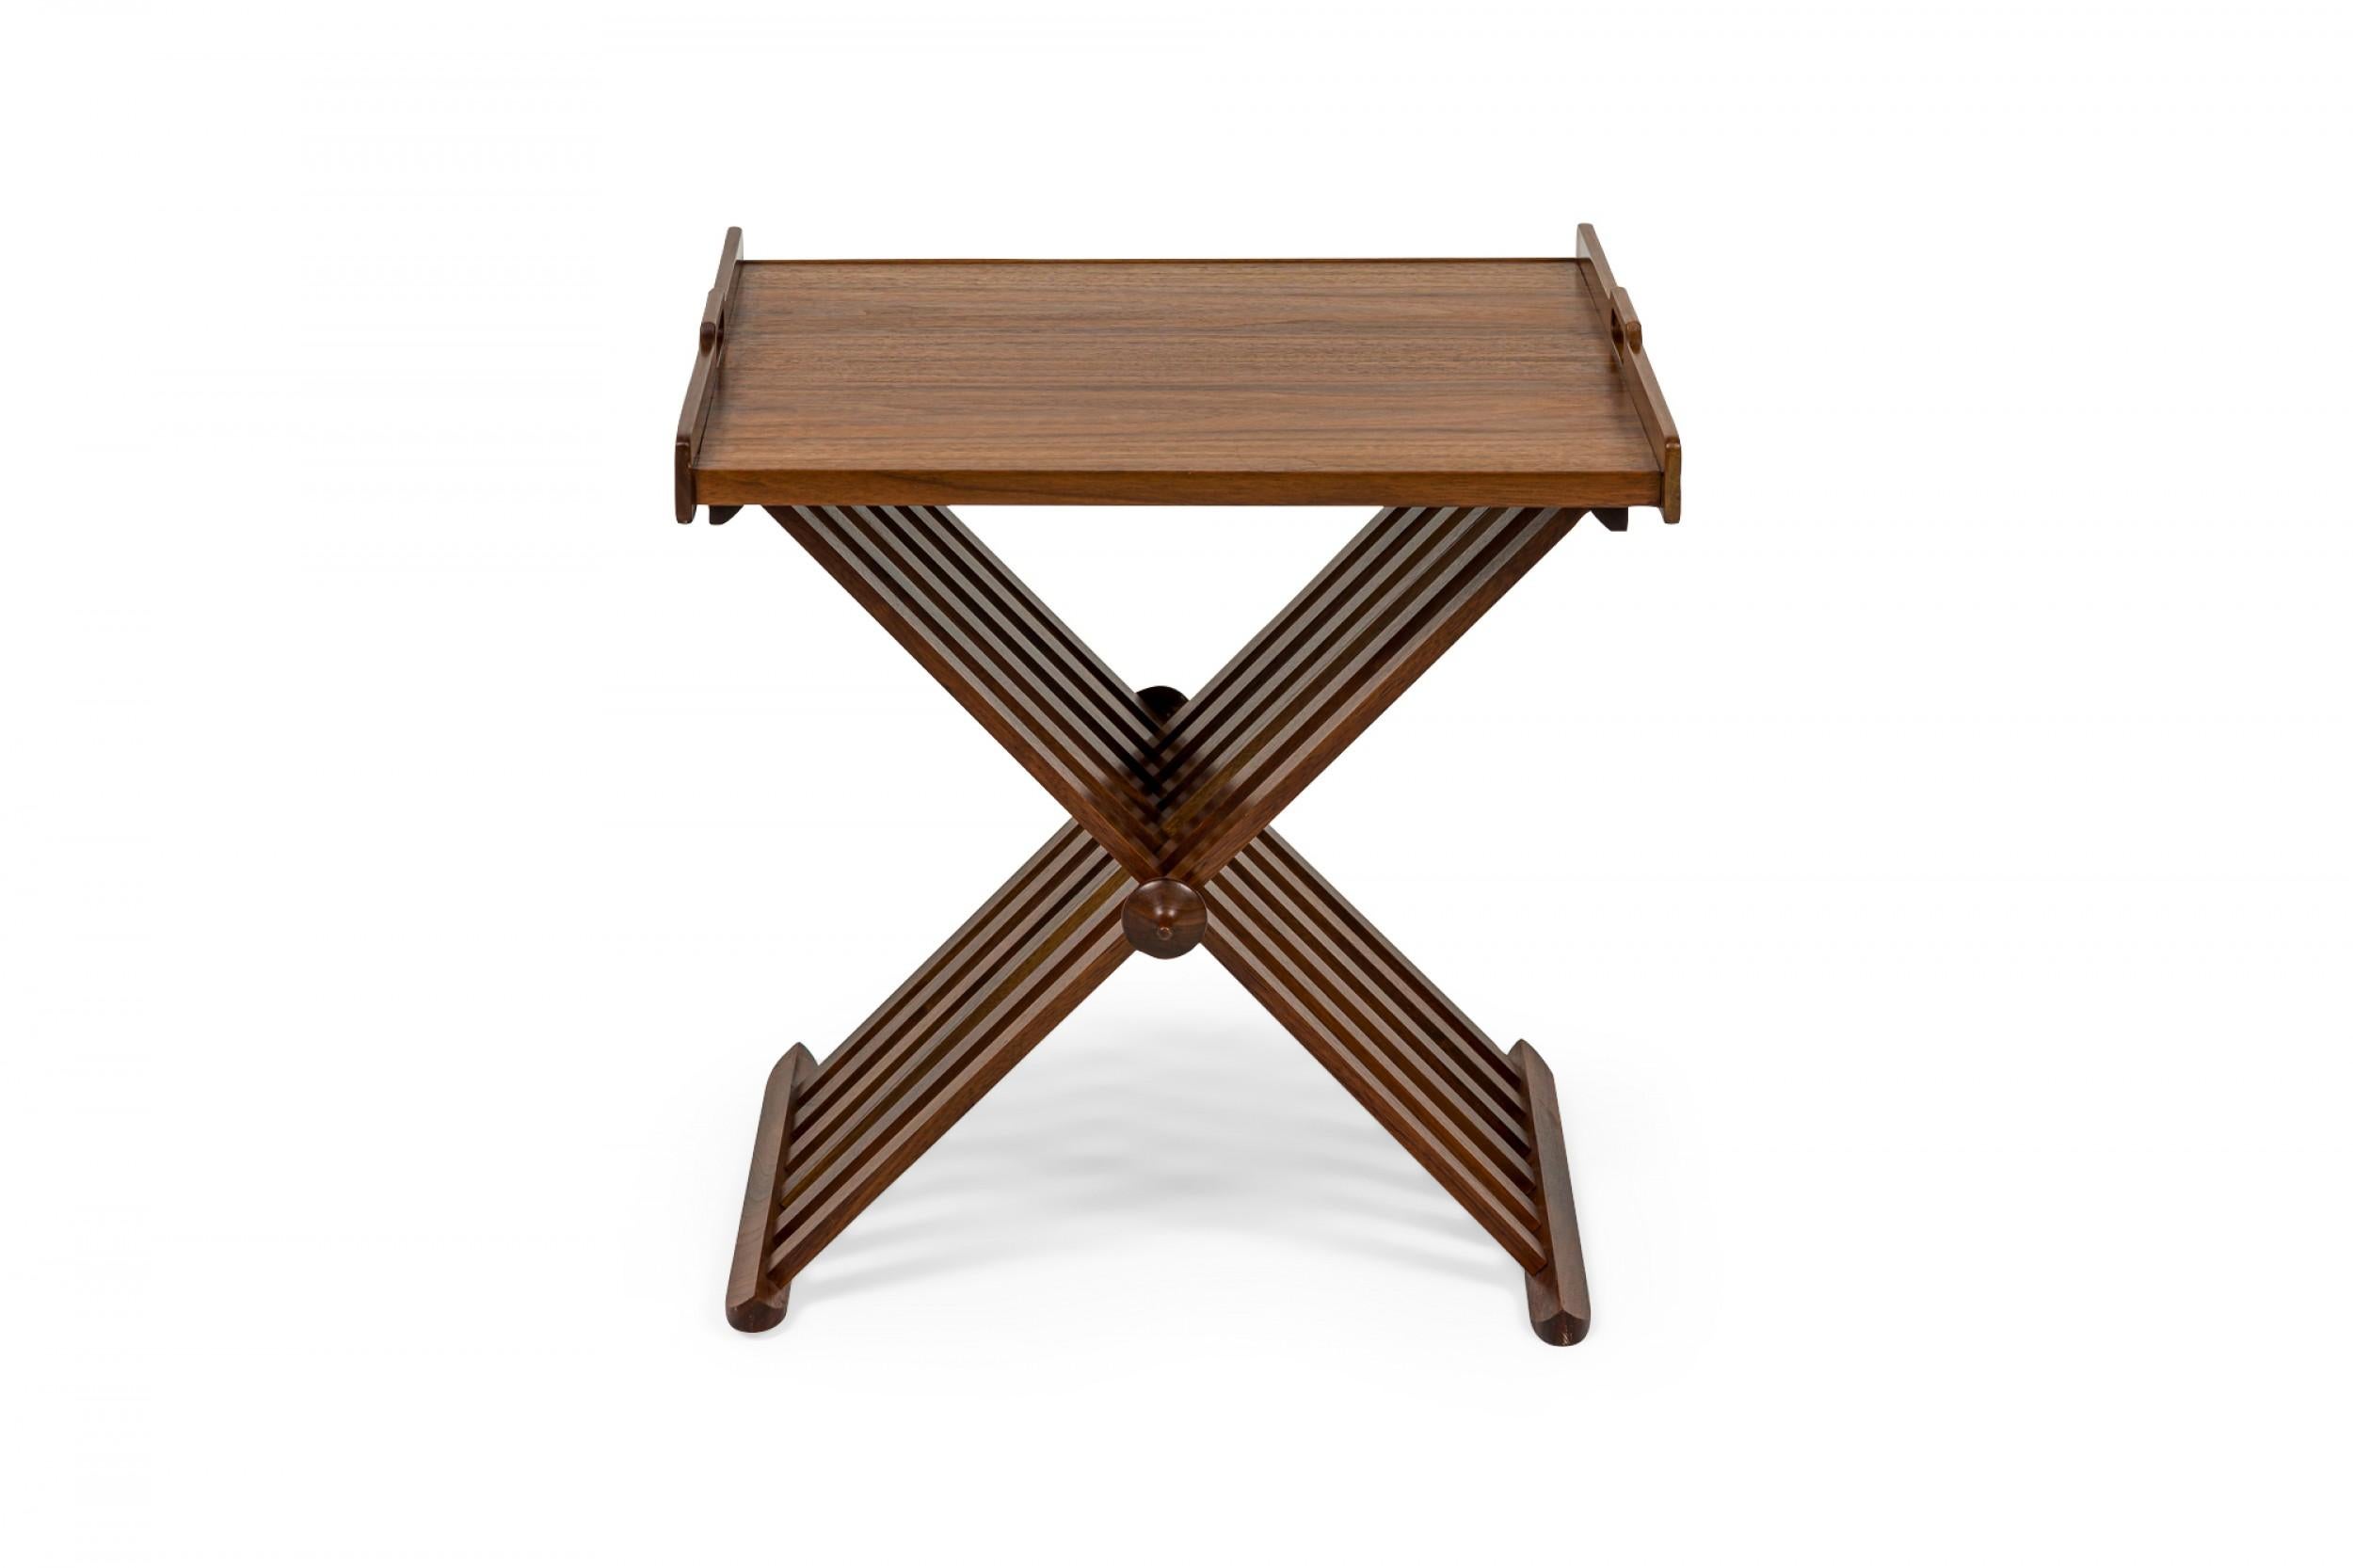 American Mid-Century wooden end / side tables with removable tray tops with two low sides with bracket-shaped cutout handles and folding X-form bases comprised of wooden slats. (KIPP STEWART FOR DREXEL FURNITURE COMPANY).